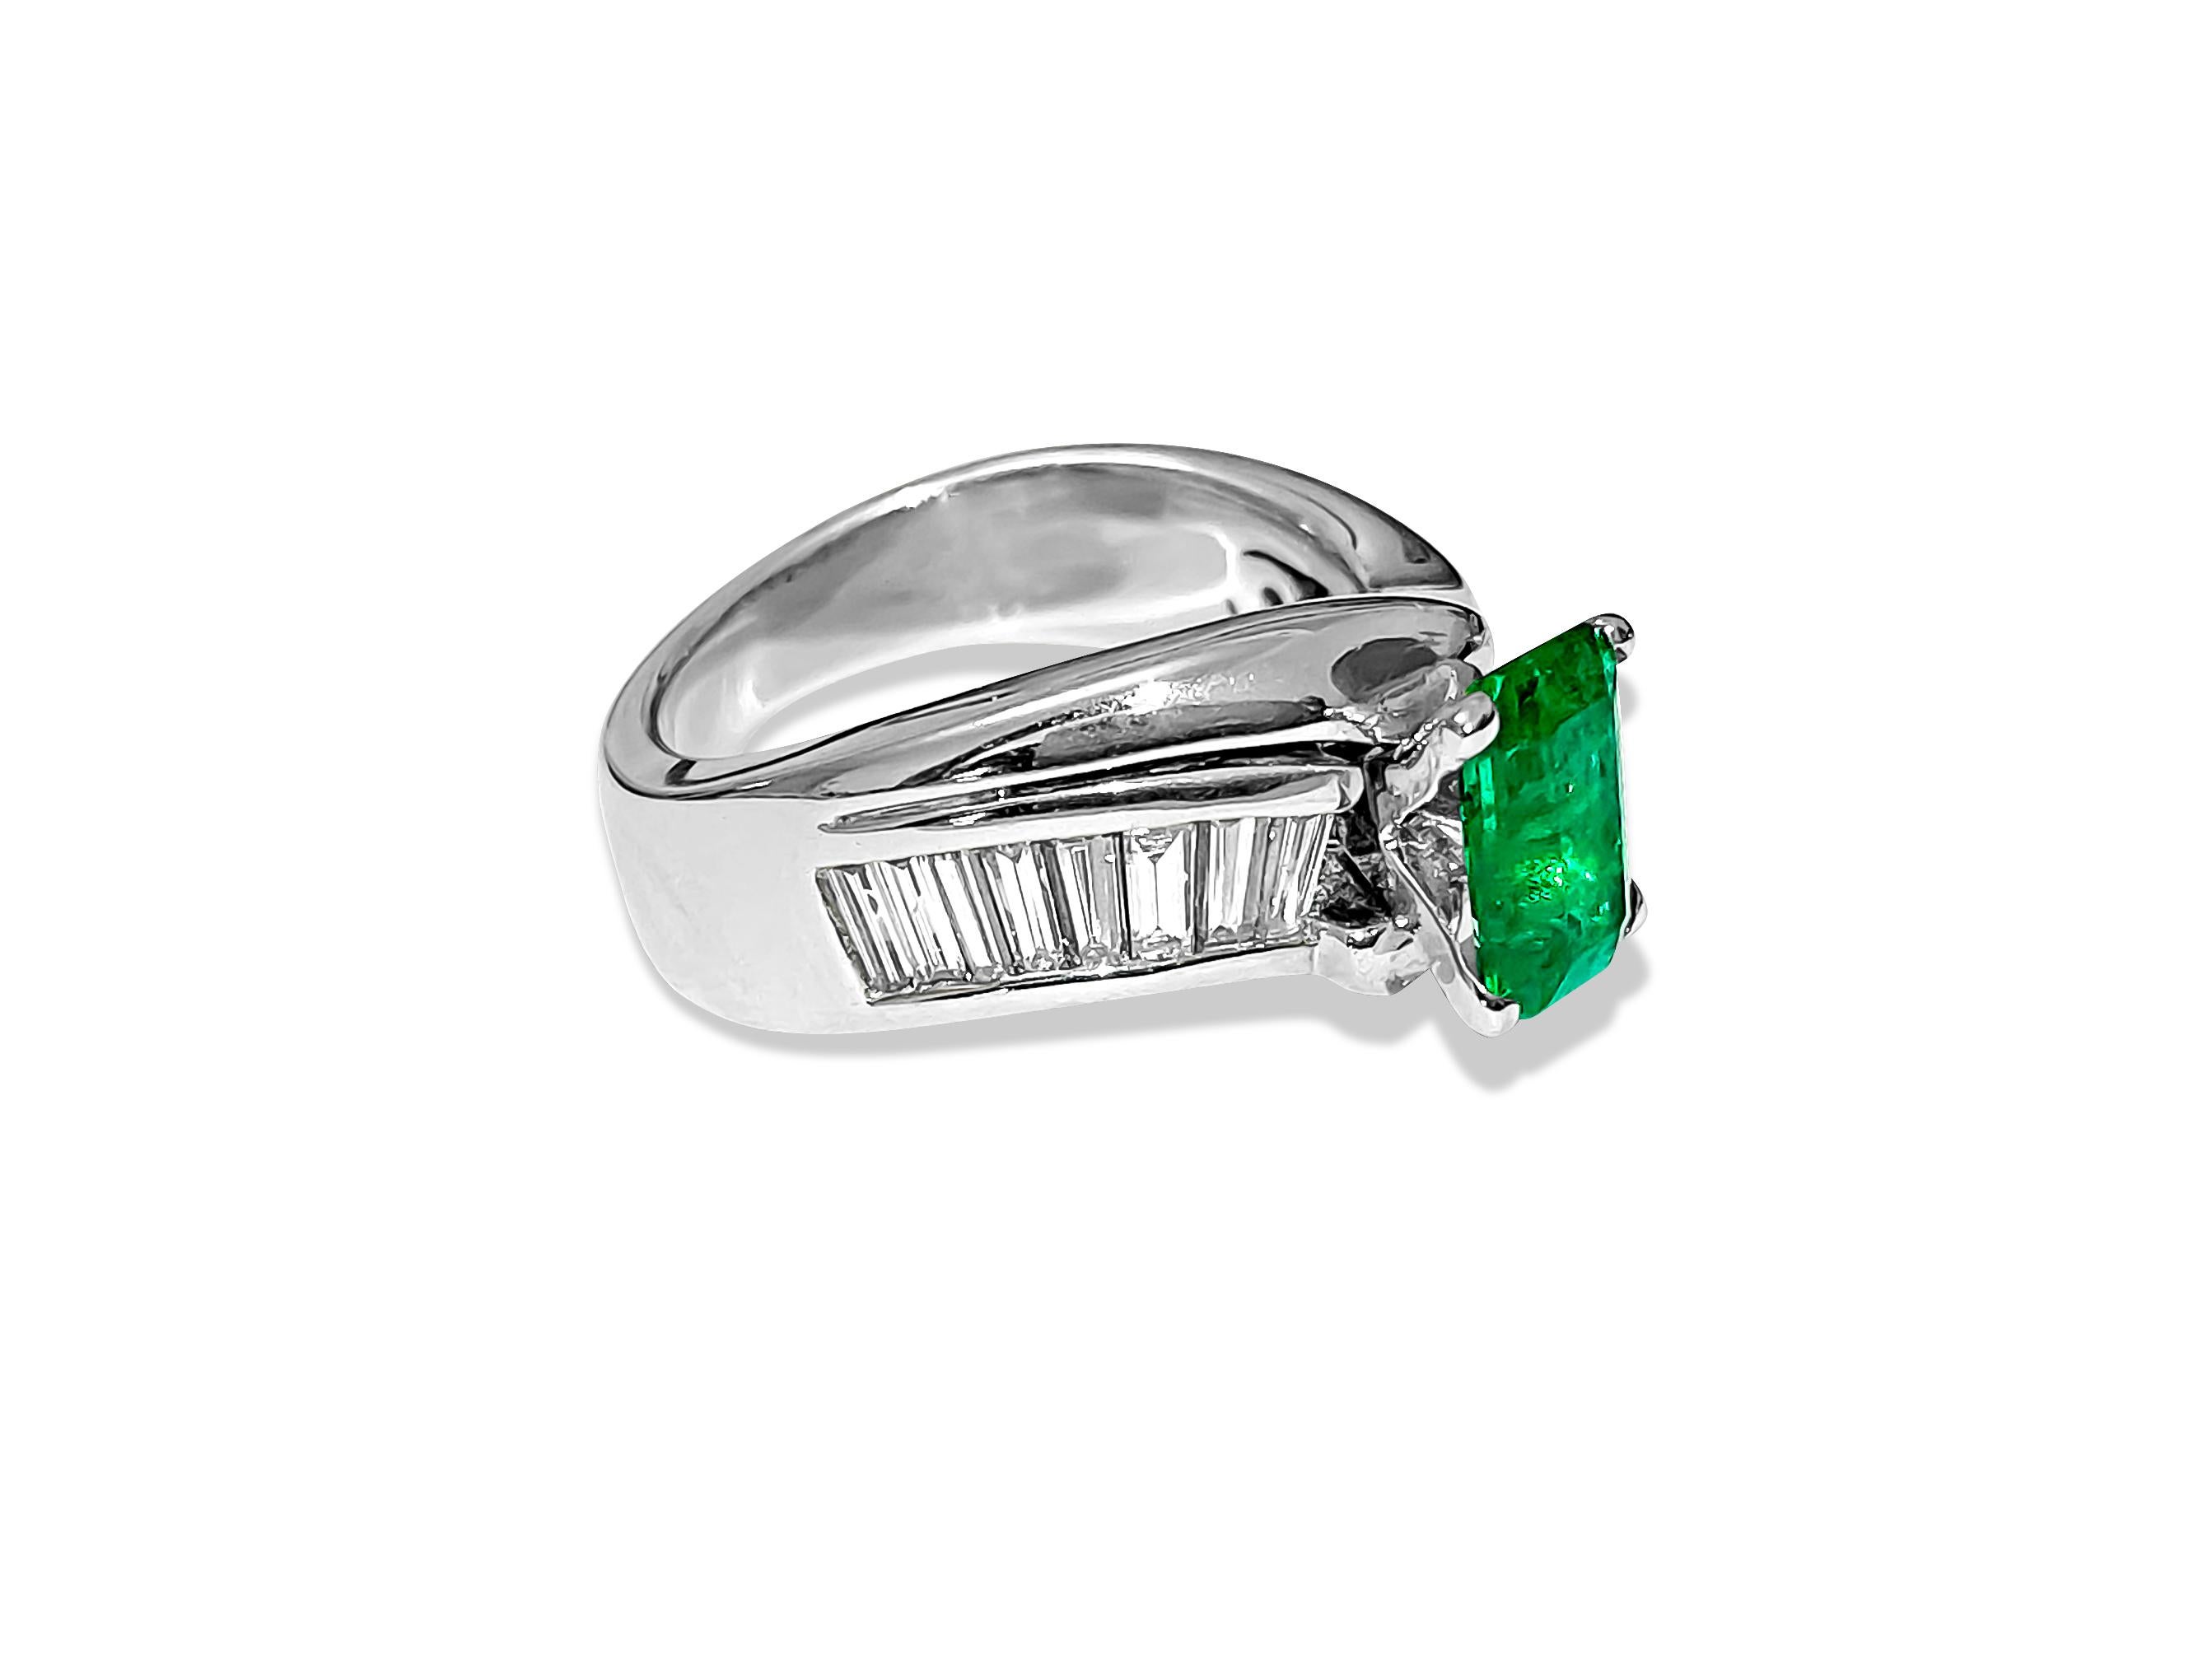 Crafted from solid 14k white gold, this exquisite engagement ring features a stunning 2.00-carat emerald center stone, showcasing excellent color and saturation in an emerald cut and set securely in prongs. Adorning the sides are 1.31 carats of